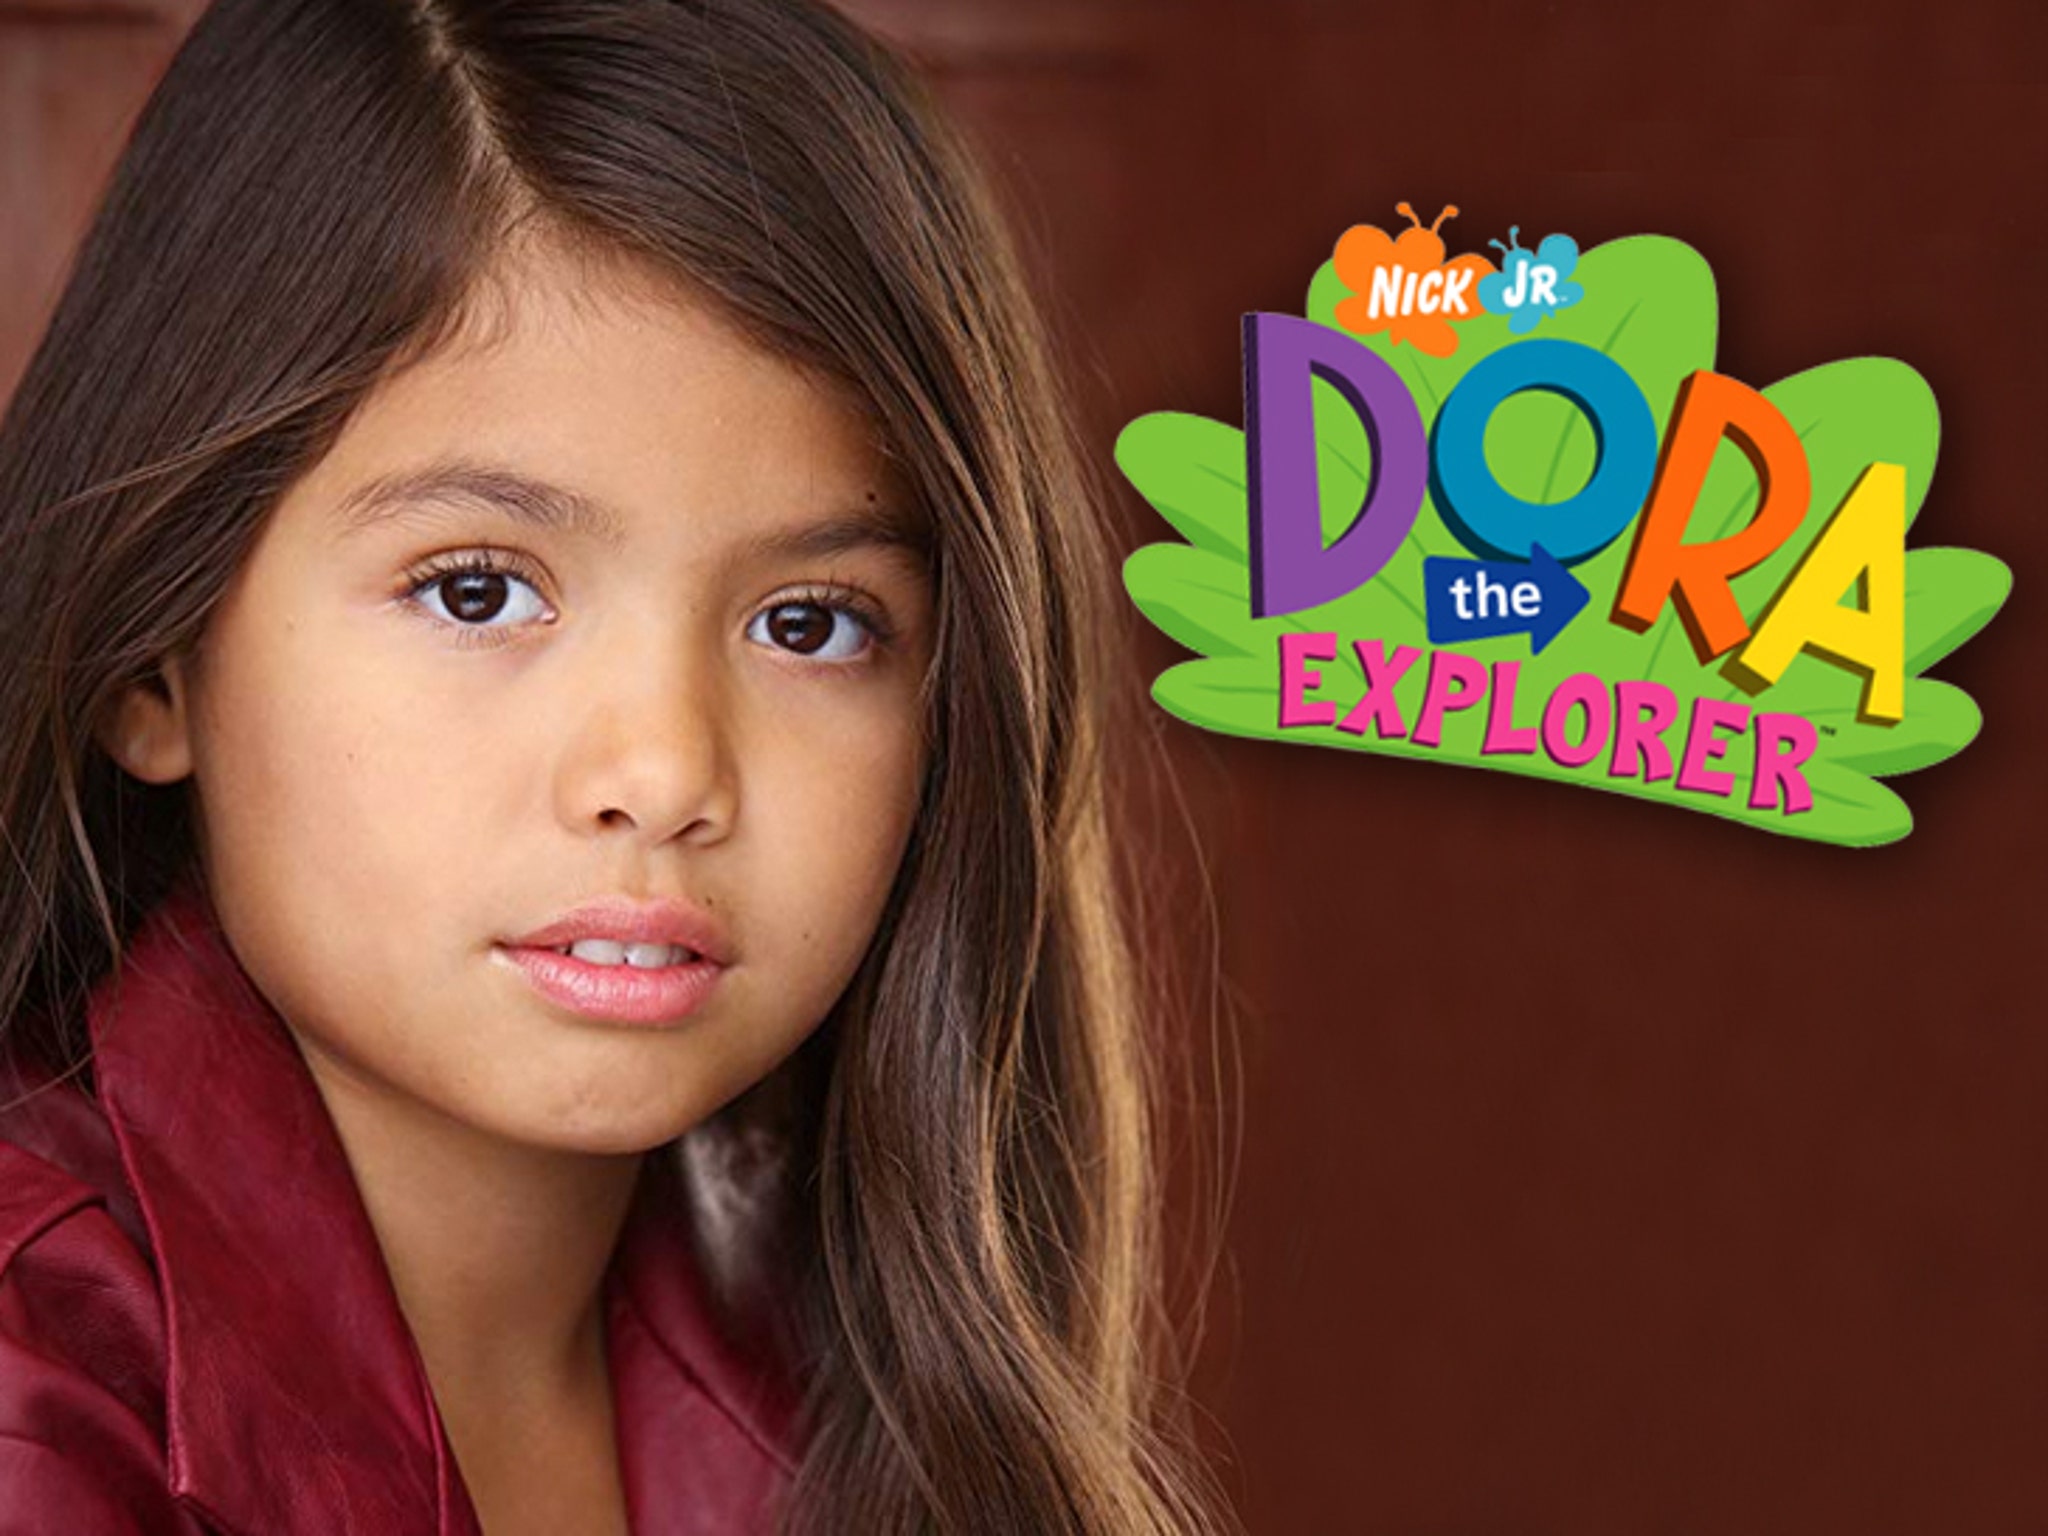 Actress Playing Young 'Dora the Explorer' Making Nearly $9,000 for